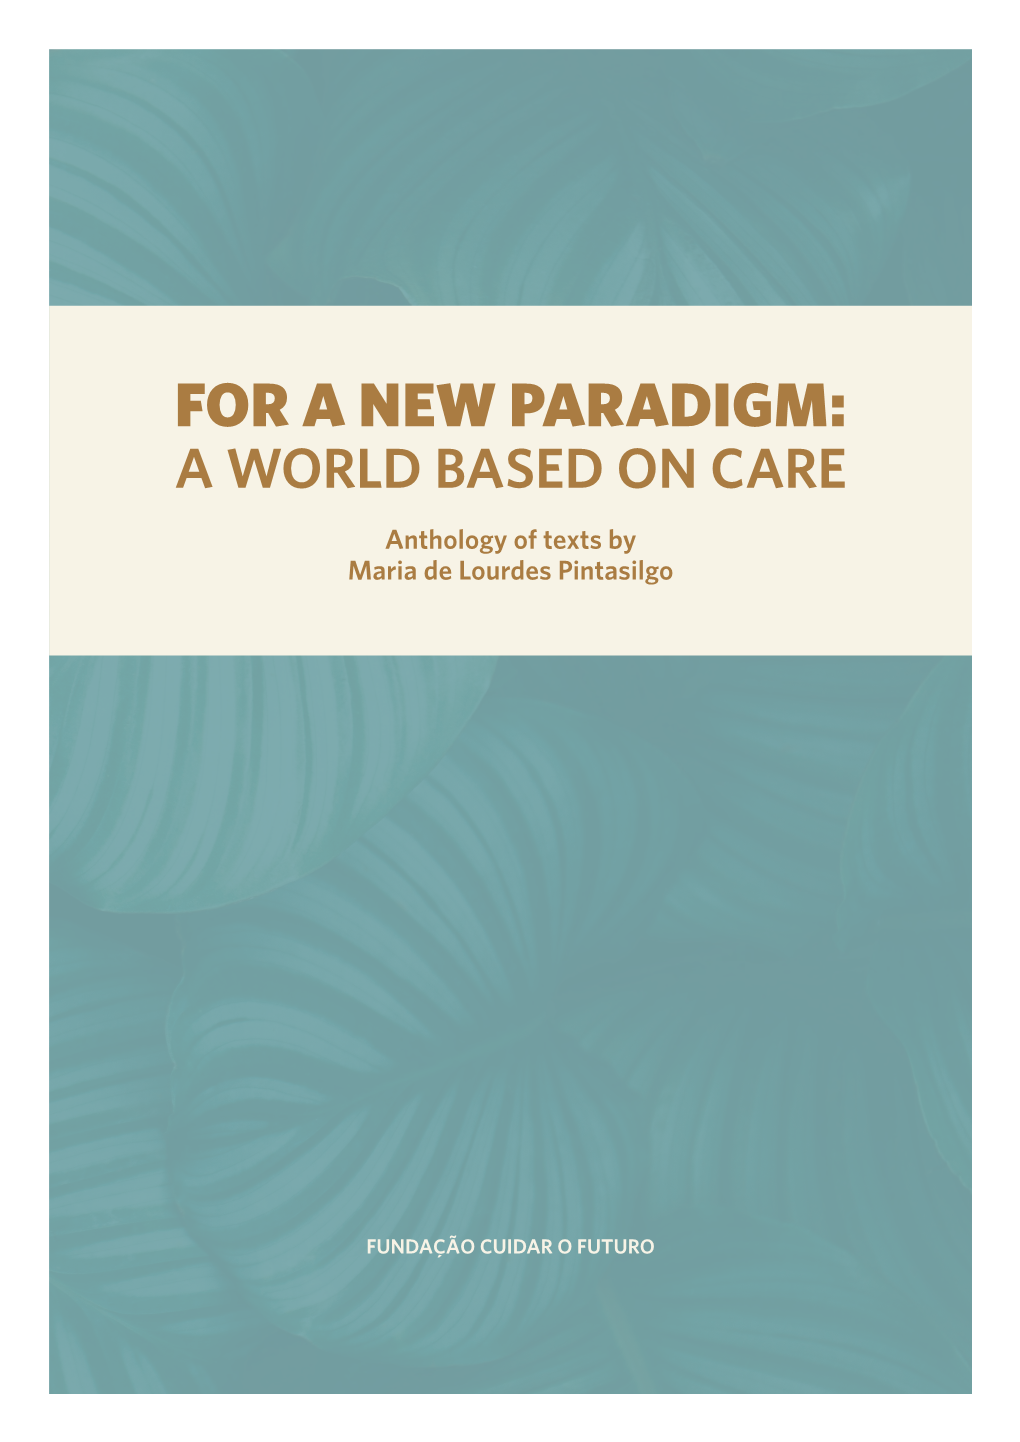 For a New Paradigm: a World Based on Care